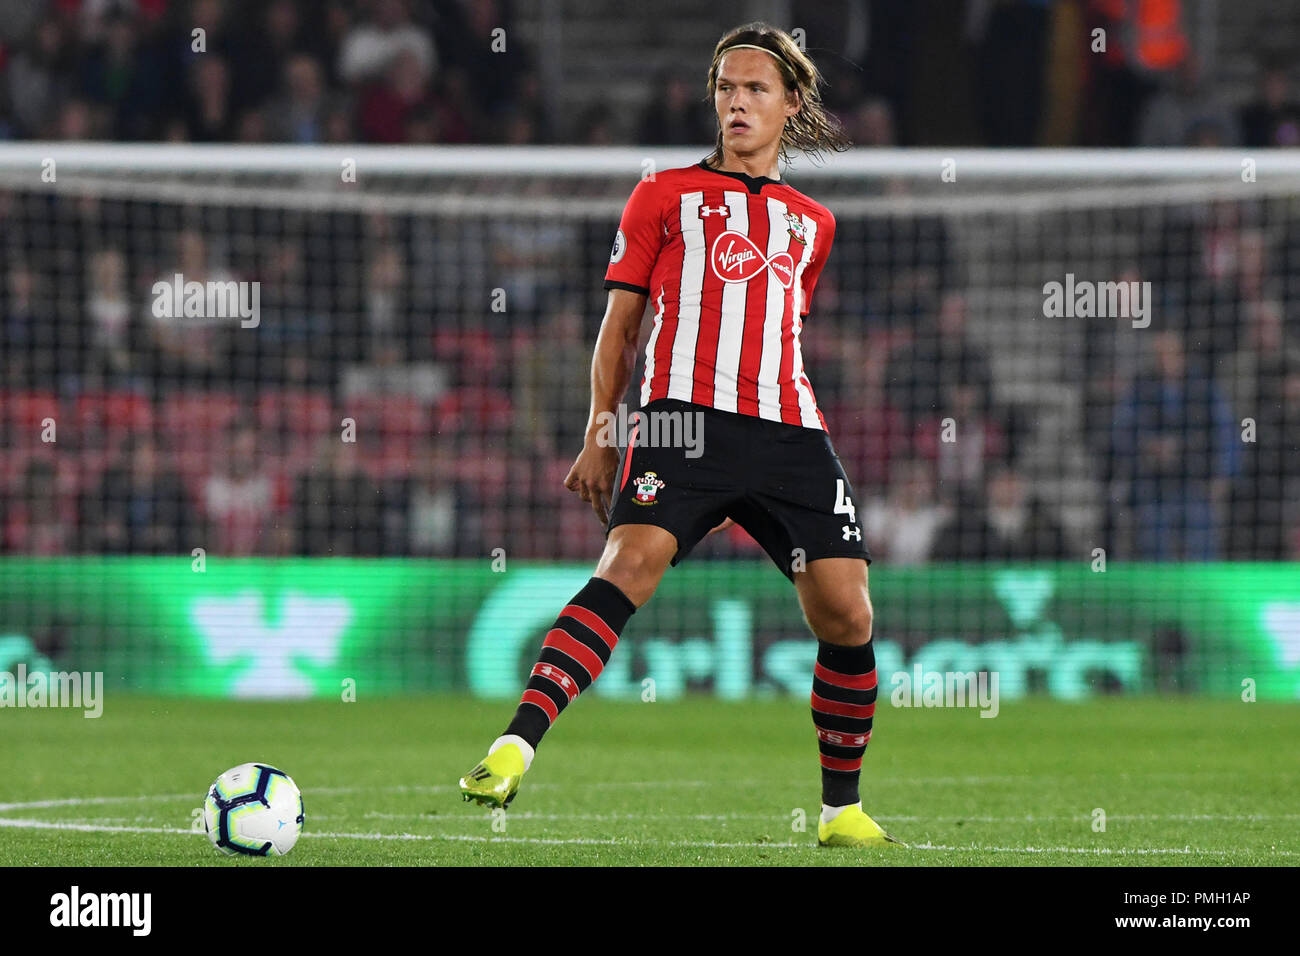 Jannik Vestergaard of Southampton - Southampton v Brighton & Hove Albion, Premier League, St Mary's Stadium, Southampton - 17th September 2018  STRICTLY EDITORIAL USE ONLY - DataCo rules apply - The use of this image in a commercial context is strictly prohibited unless express permission has been given by the club(s) concerned. Examples of commercial usage include, but are not limited to, use in betting and gaming, marketing and advertising products. No use with unauthorised audio, video, data, fixture lists, club and or league logos or services including those listed as 'live' Stock Photo